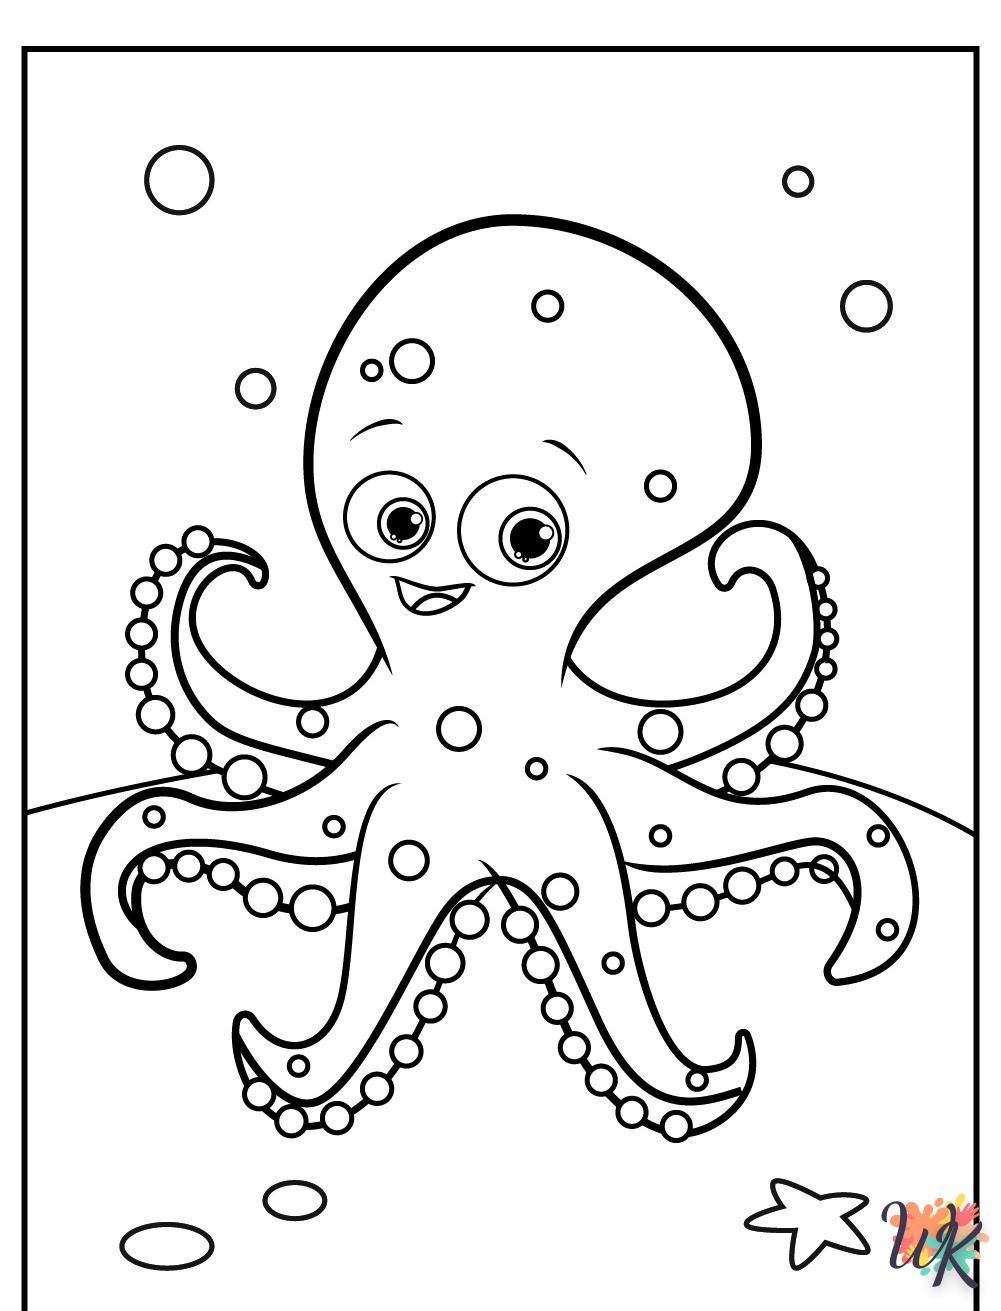 Octopus coloring for children